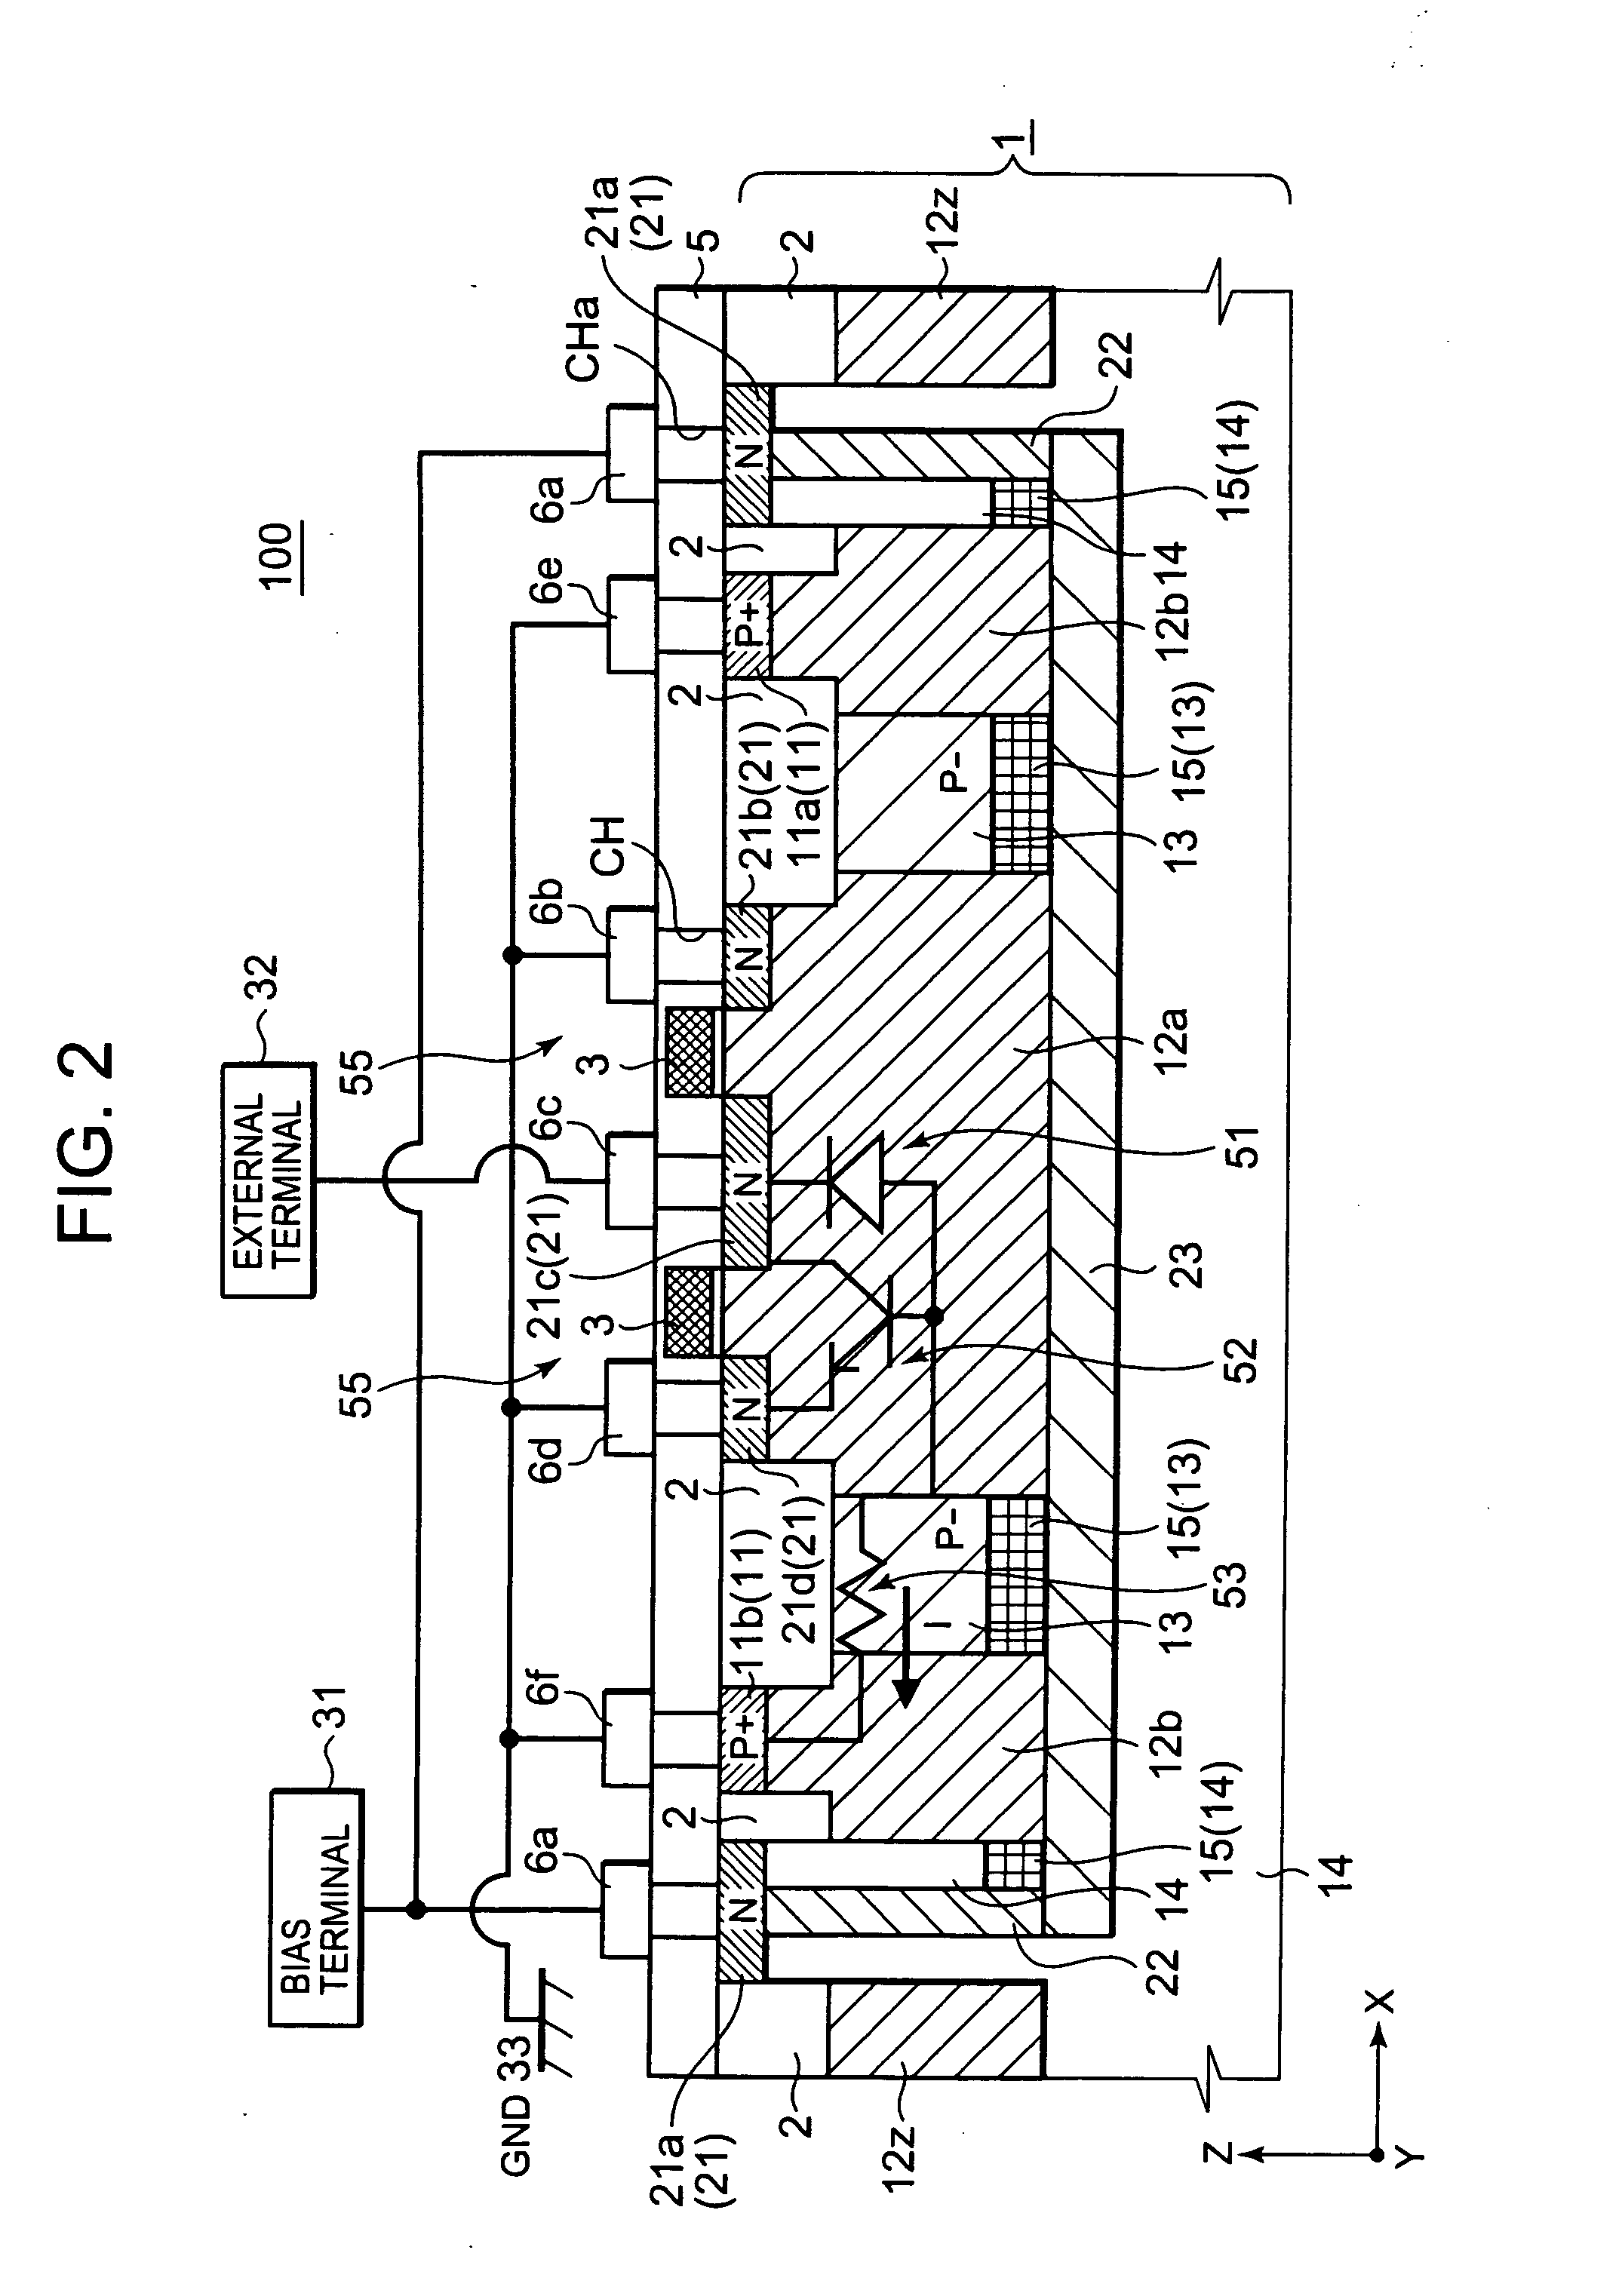 Semiconductor device having electro-static discharge protection element